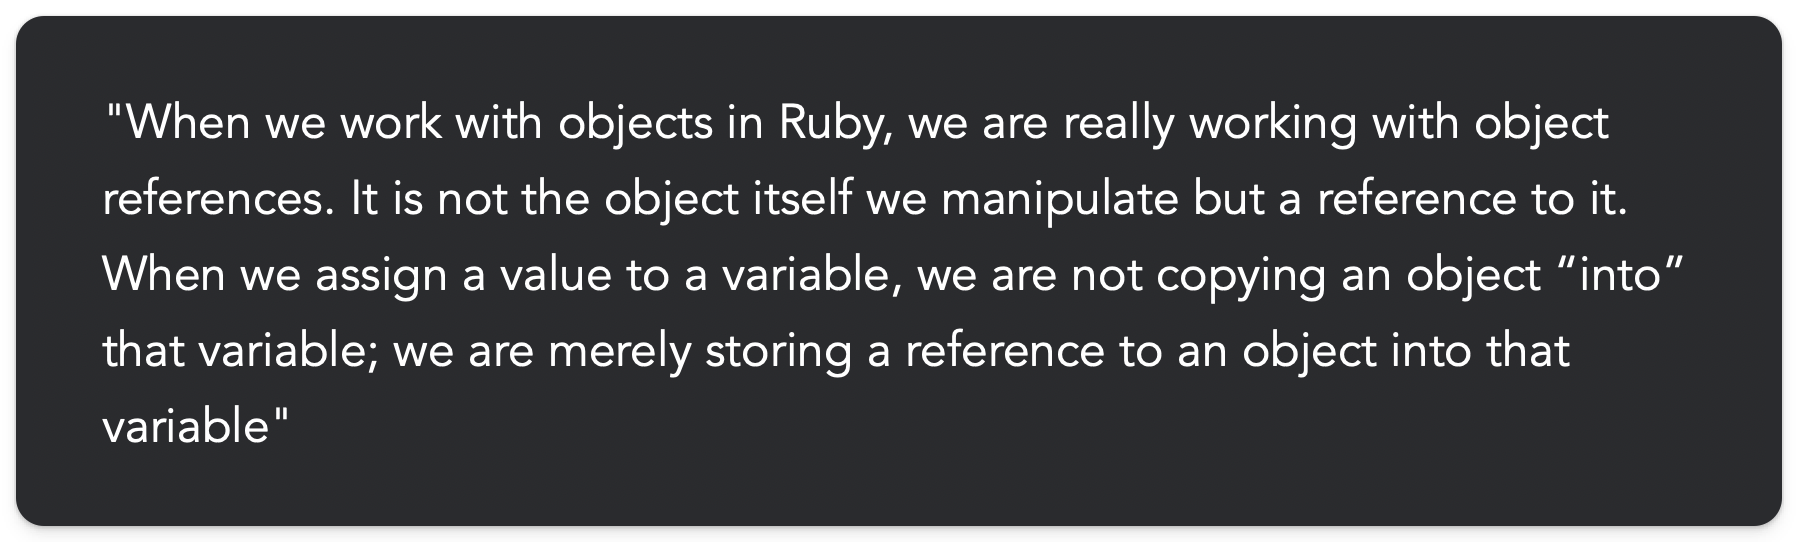 "When we work with objects in Ruby, we are really working with object references. It is not the object itself we manipulate but a reference to it. When we assign a value to a variable, we are not copying an object into that variable; we are merely storing a reference to an object into that variable"